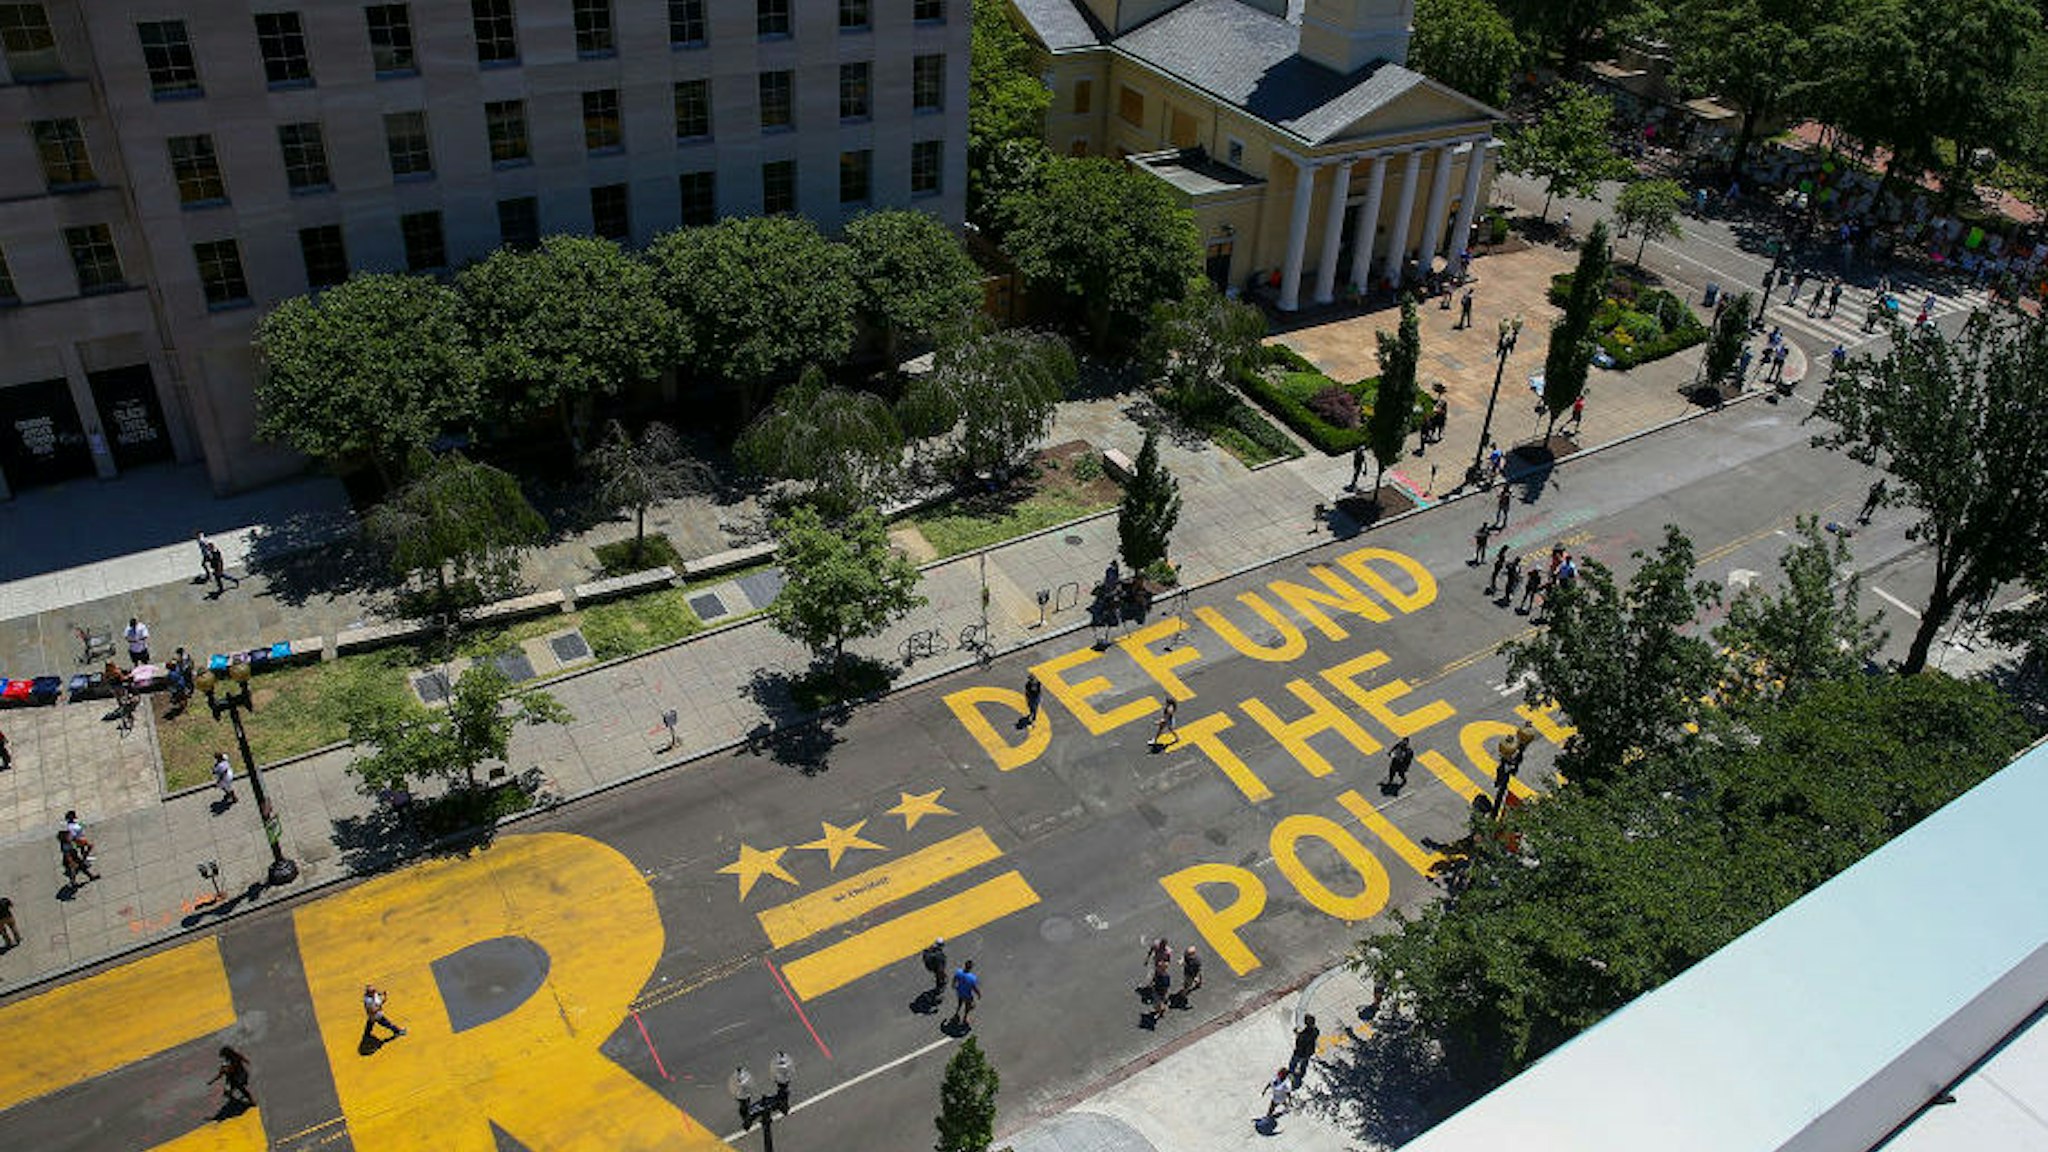 People walk down 16th street after ‚ÄúDefund The Police‚Äù was painted on the street near the White House on June 08, 2020 in Washington, DC. After days of protests in DC over the death of George Floyd, DC Mayor Muriel Bowser has renamed that section of 16th street "Black Lives Matter Plaza". (Photo by Tasos Katopodis/Getty Images)